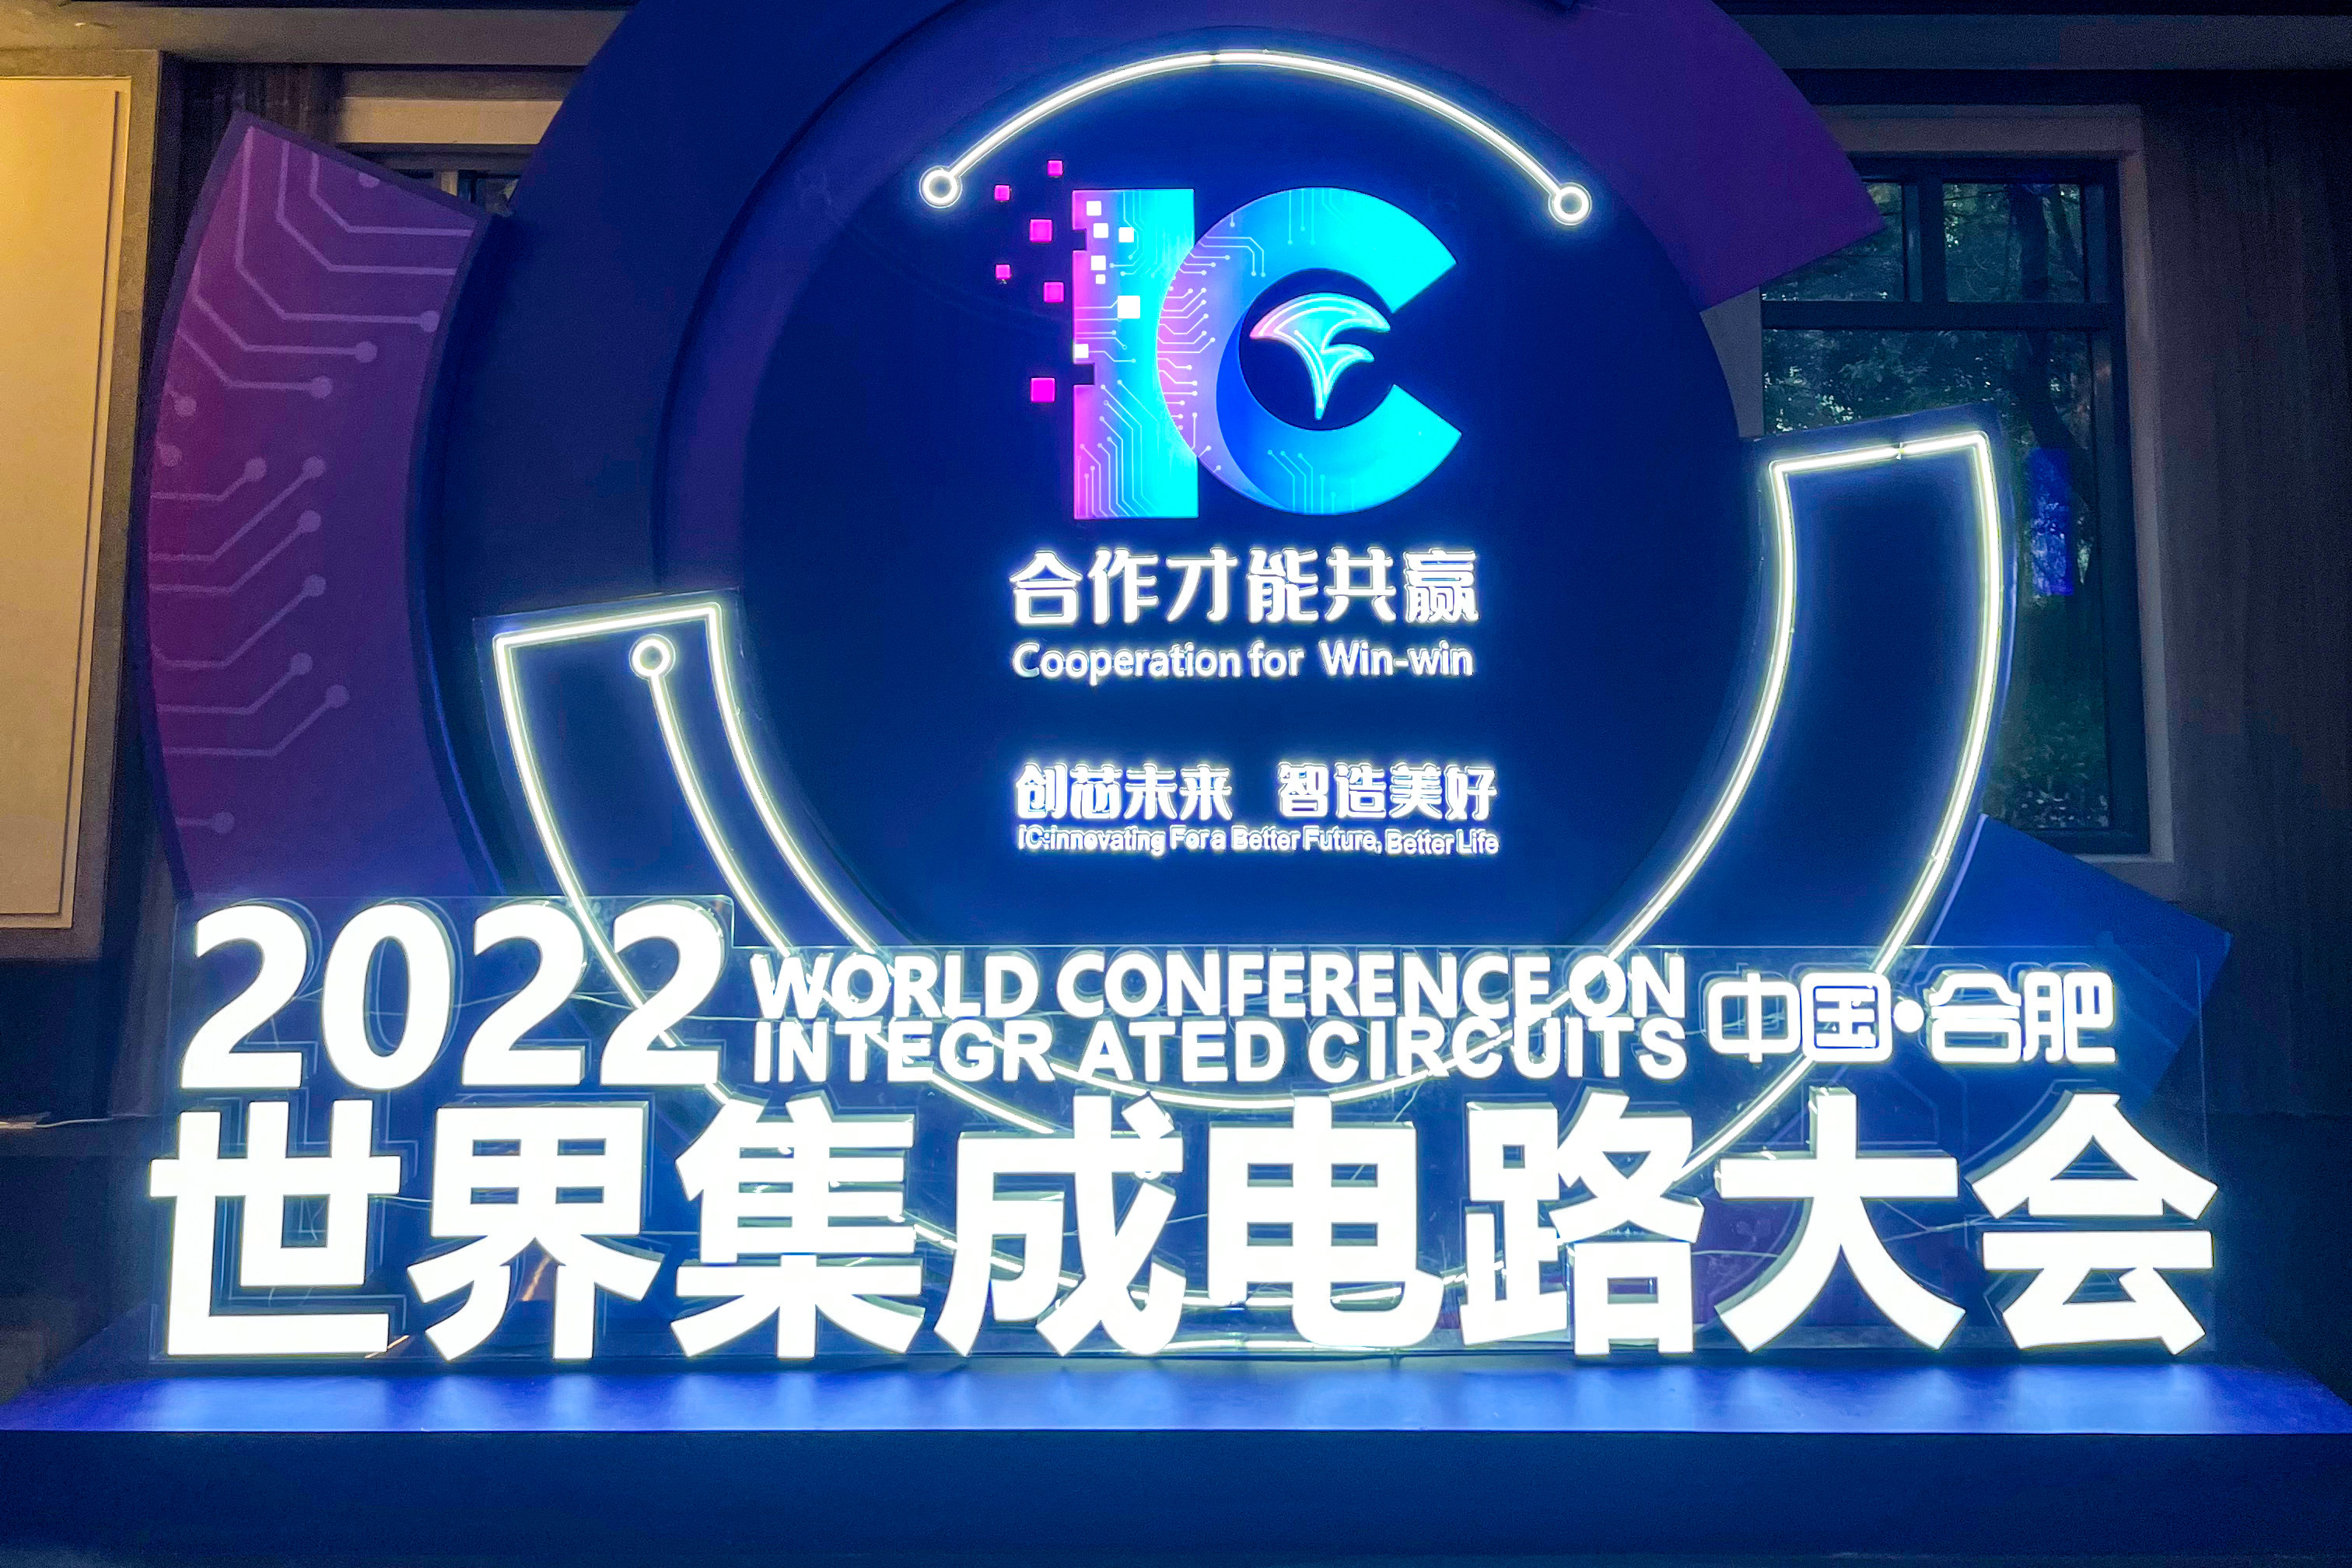 The logo of the 2020 Global Conference on Integrated Circuits is displayed in Hefei, capital of of eastern Anhui province, on November 17, 2022 Photo: Weibo